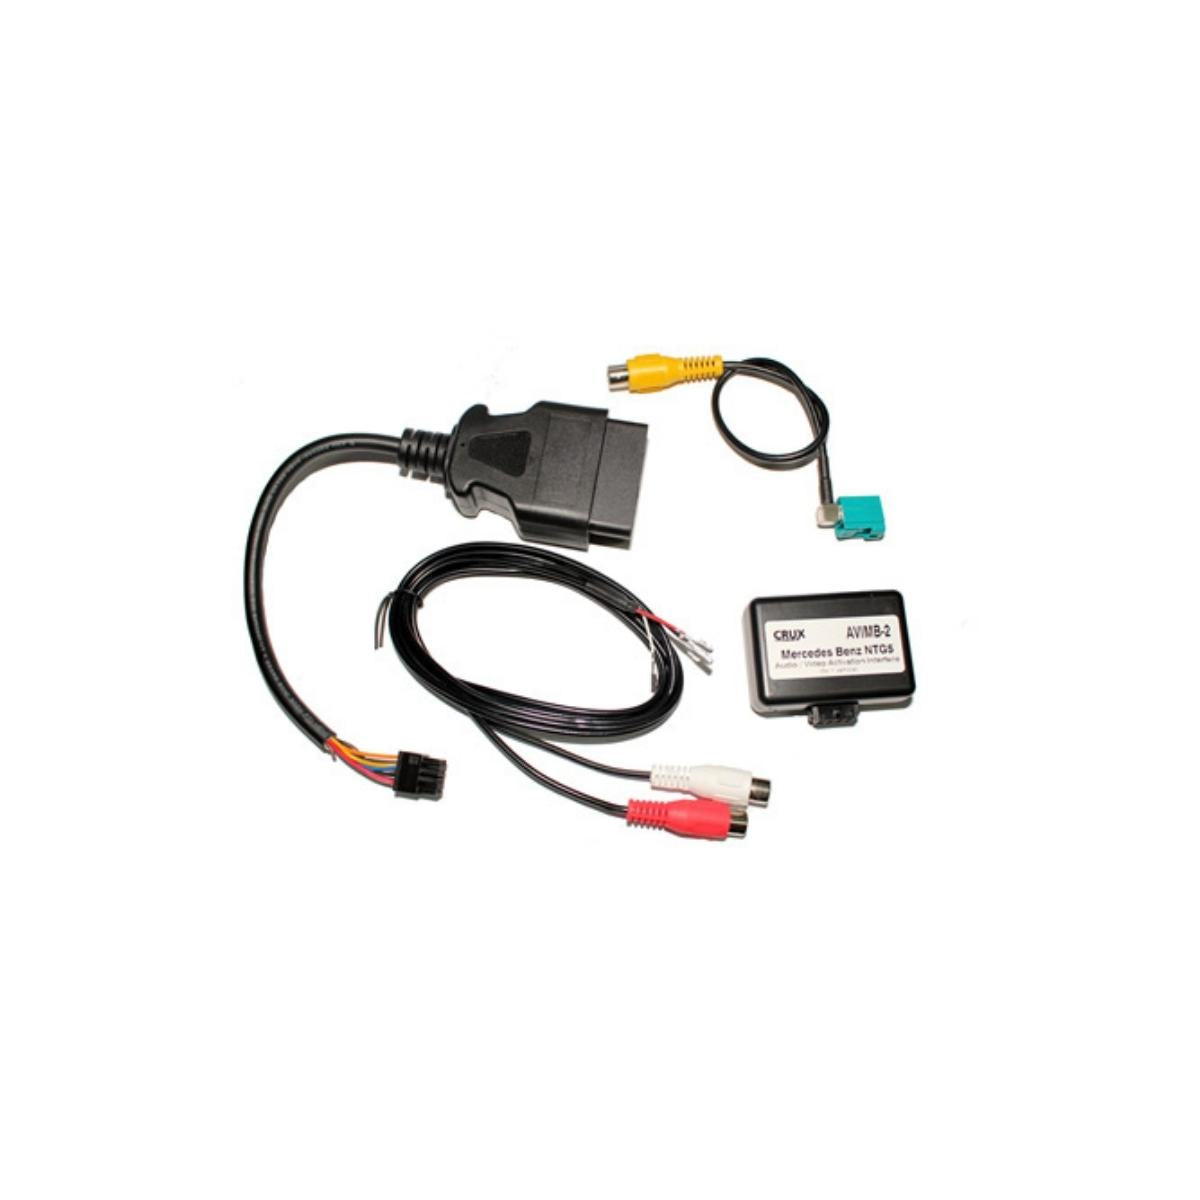 CRUX AVIMB-2 Audio Video Interface with OBD Coder